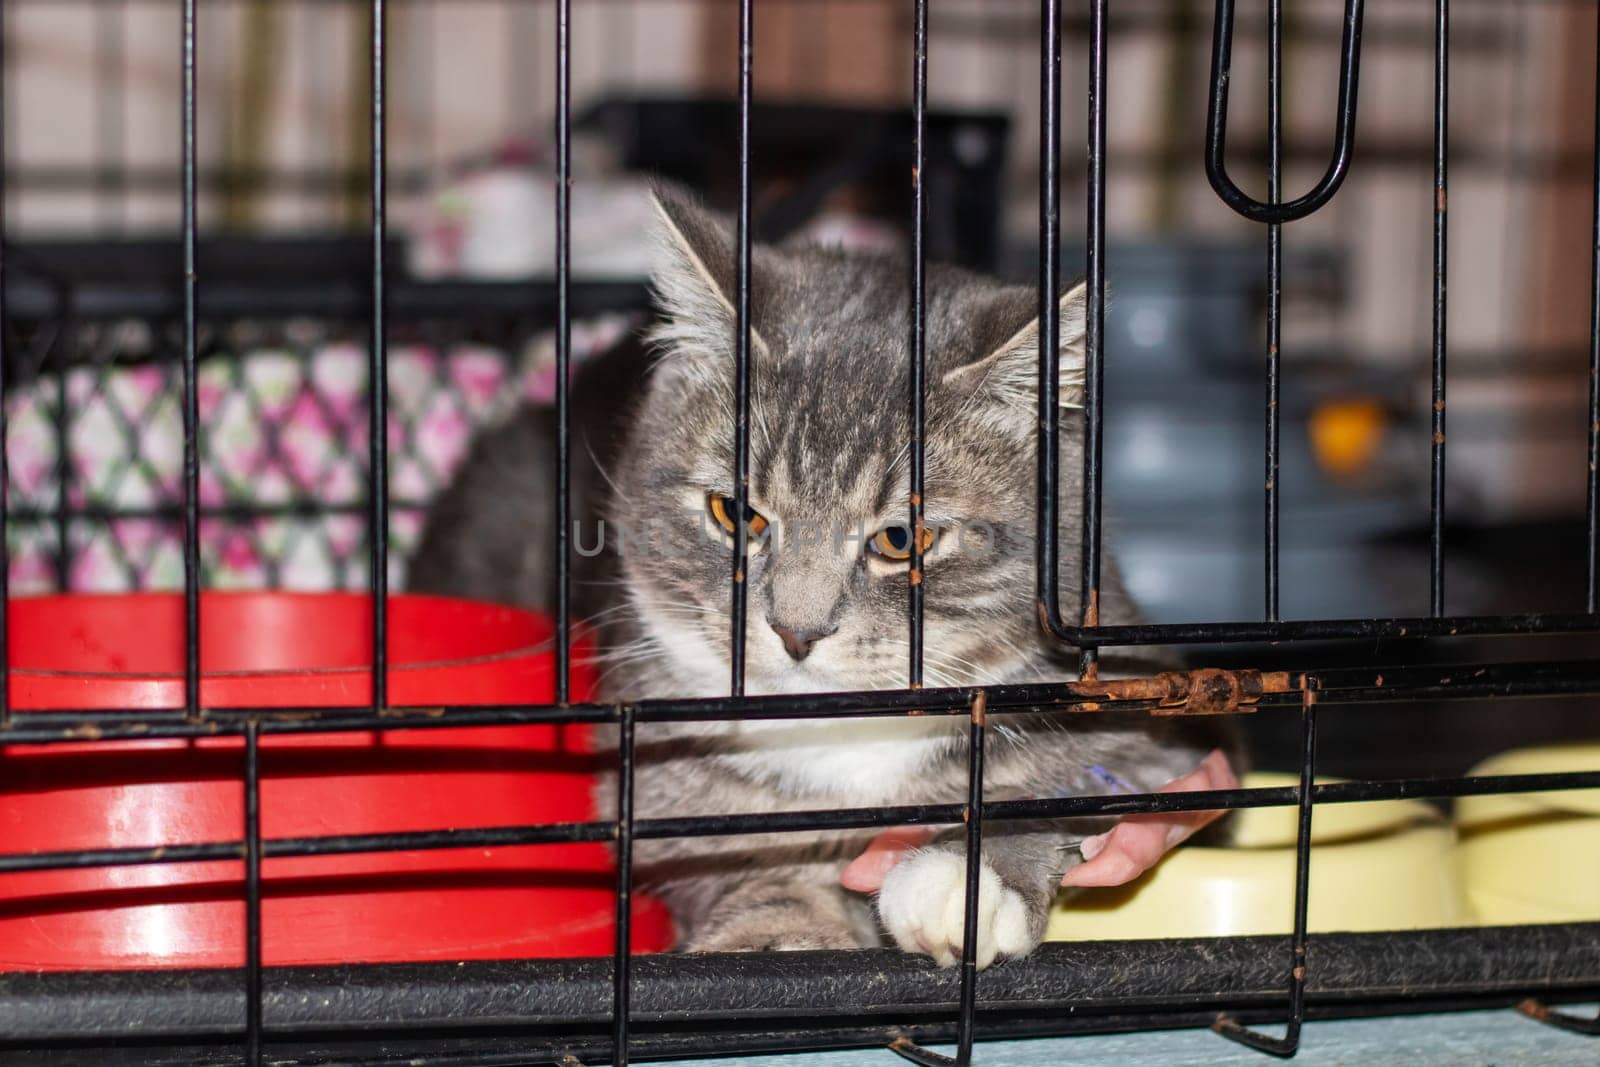 A Felidae carnivore with fawn fur and whiskers is confined behind a mesh fence in a pet supply store. The small to mediumsized cat gazes out the window at the camera